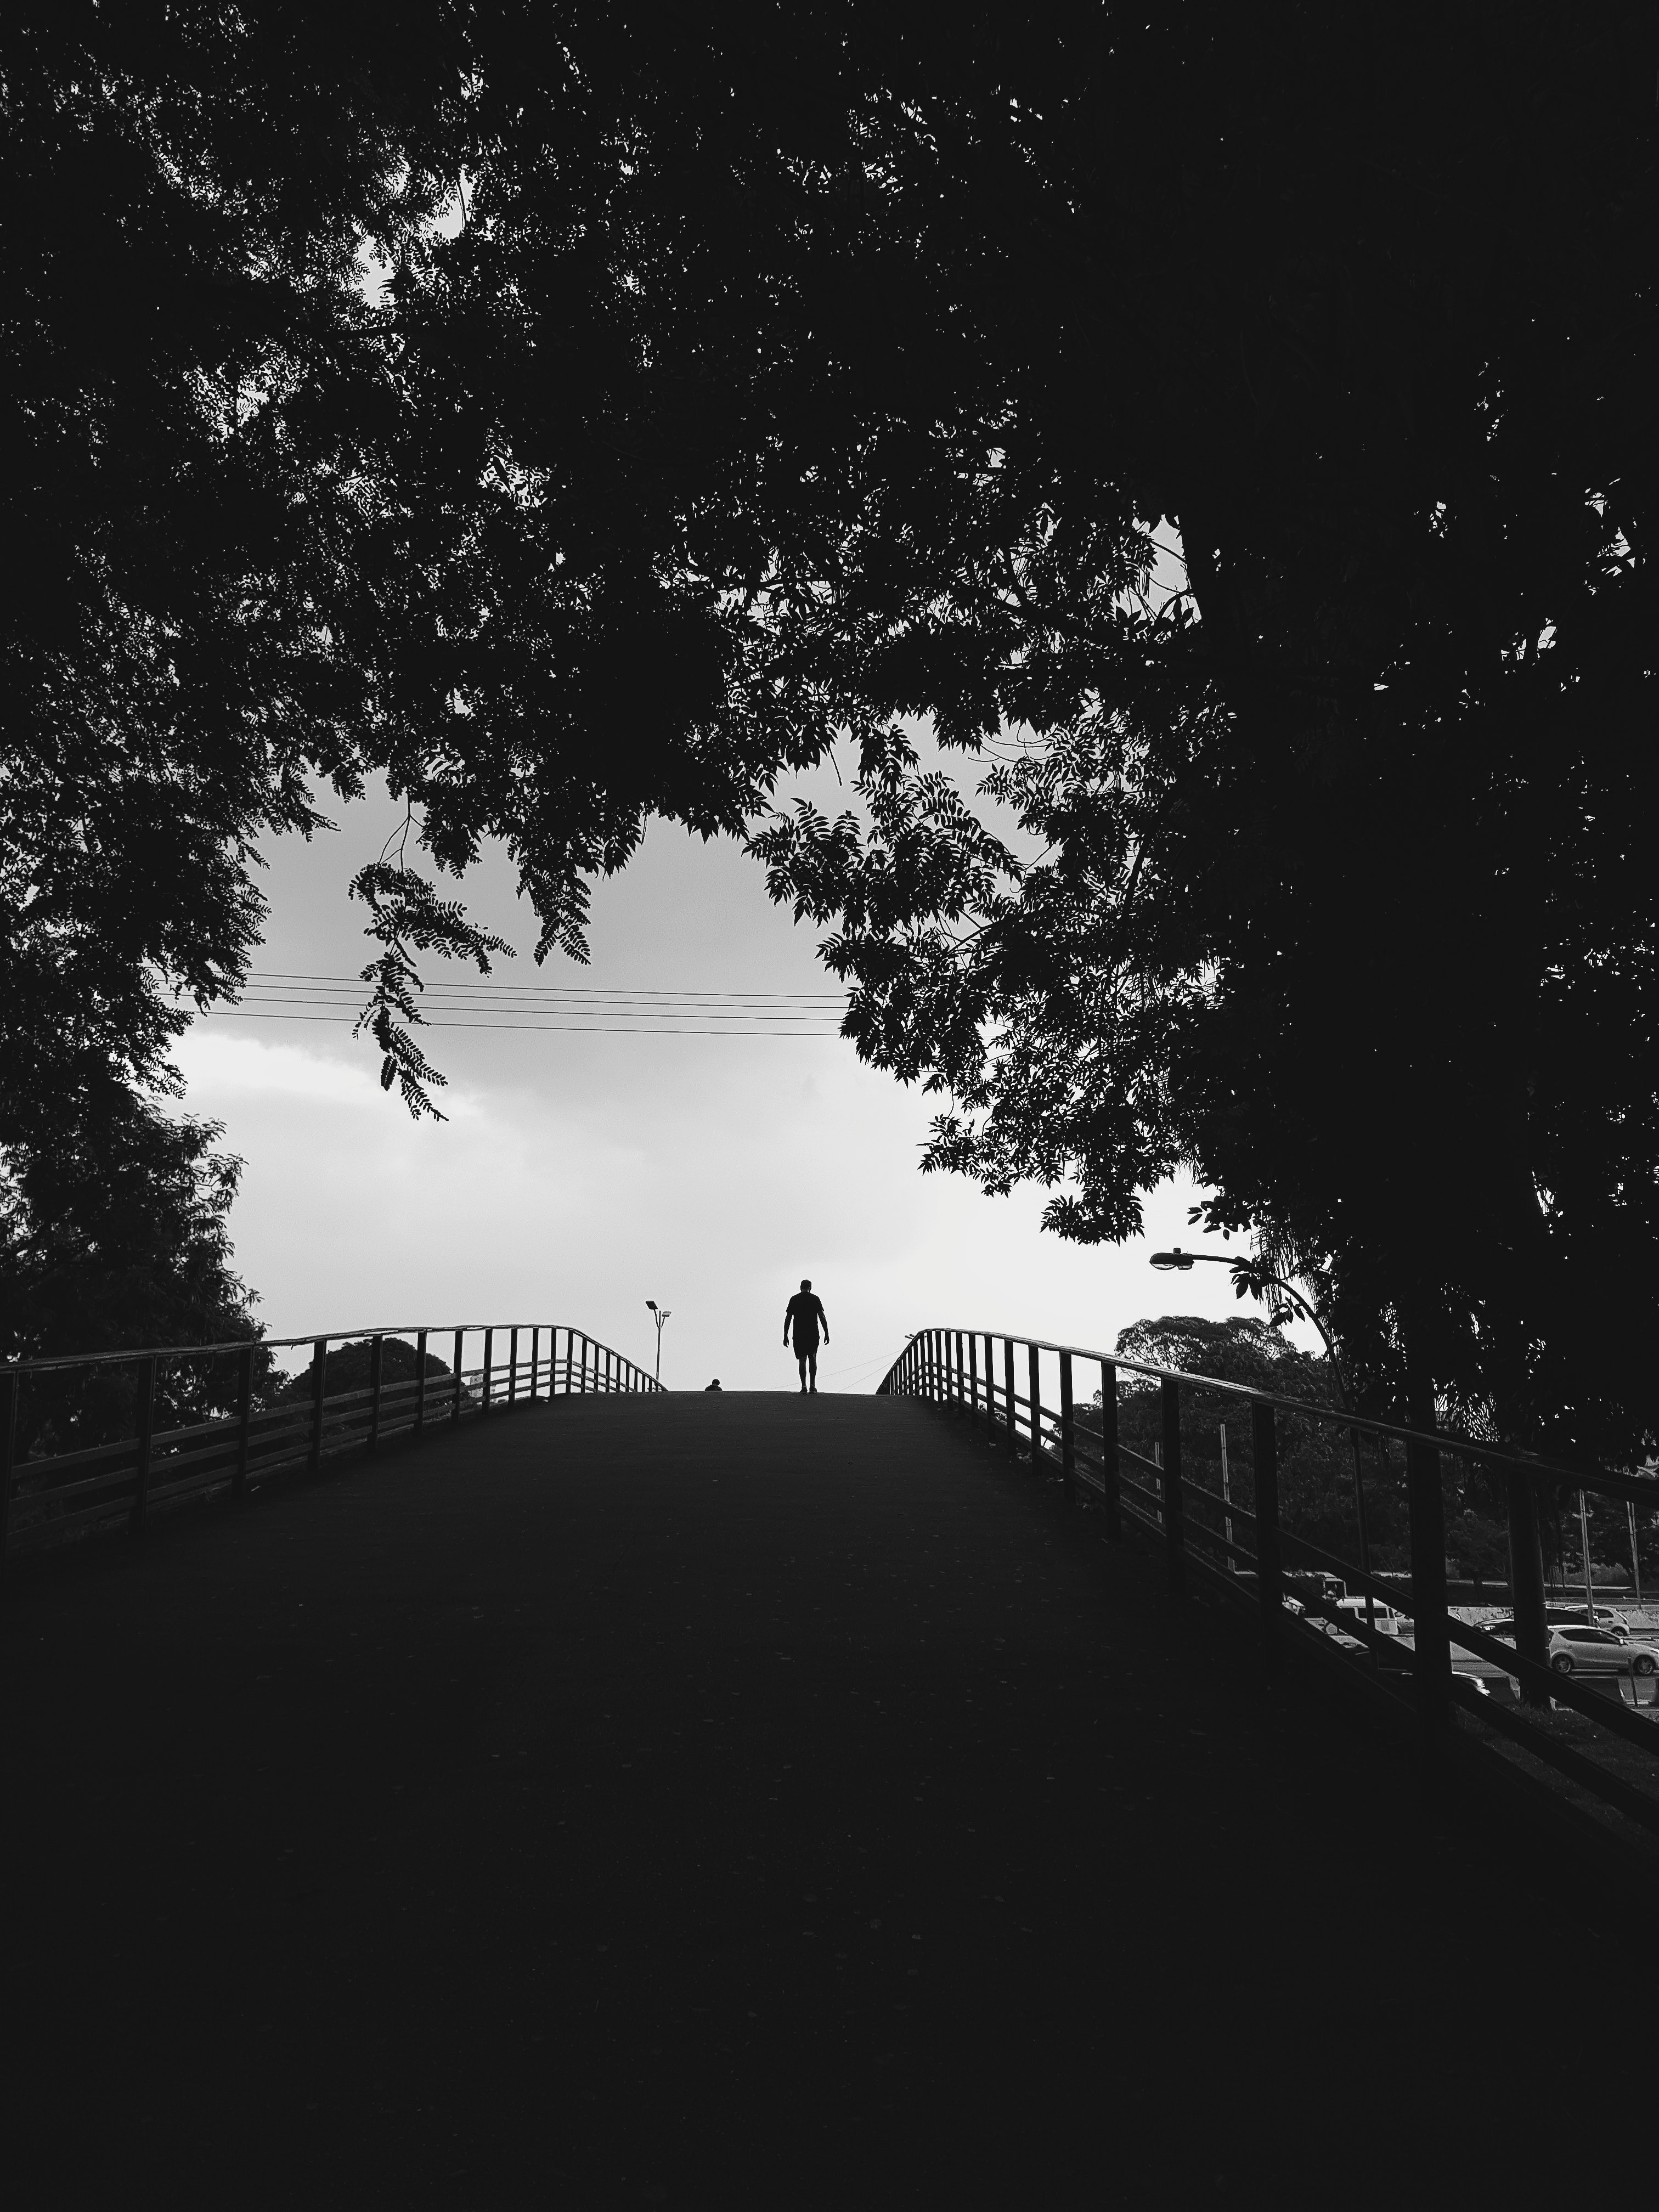 alone, trees, black, silhouette, stroll, bw, chb, loneliness, lonely 4K, Ultra HD